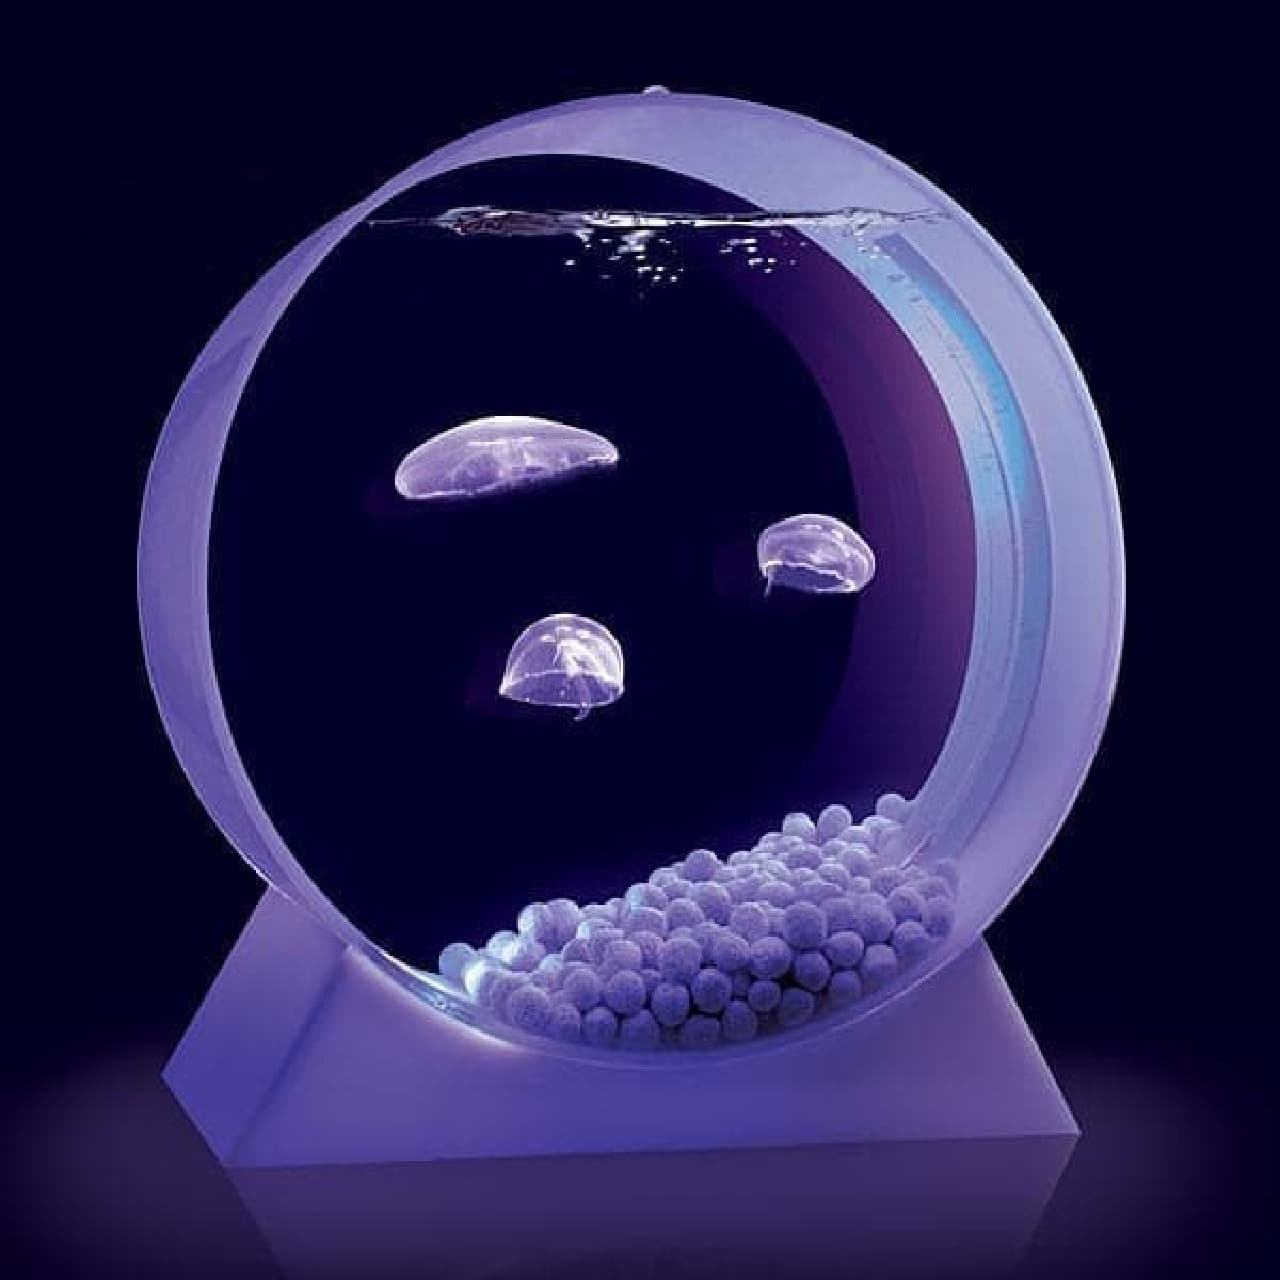 Reference image: "Desktop Jellyfish Tank" Compared to the latest version, the design seems a little old.